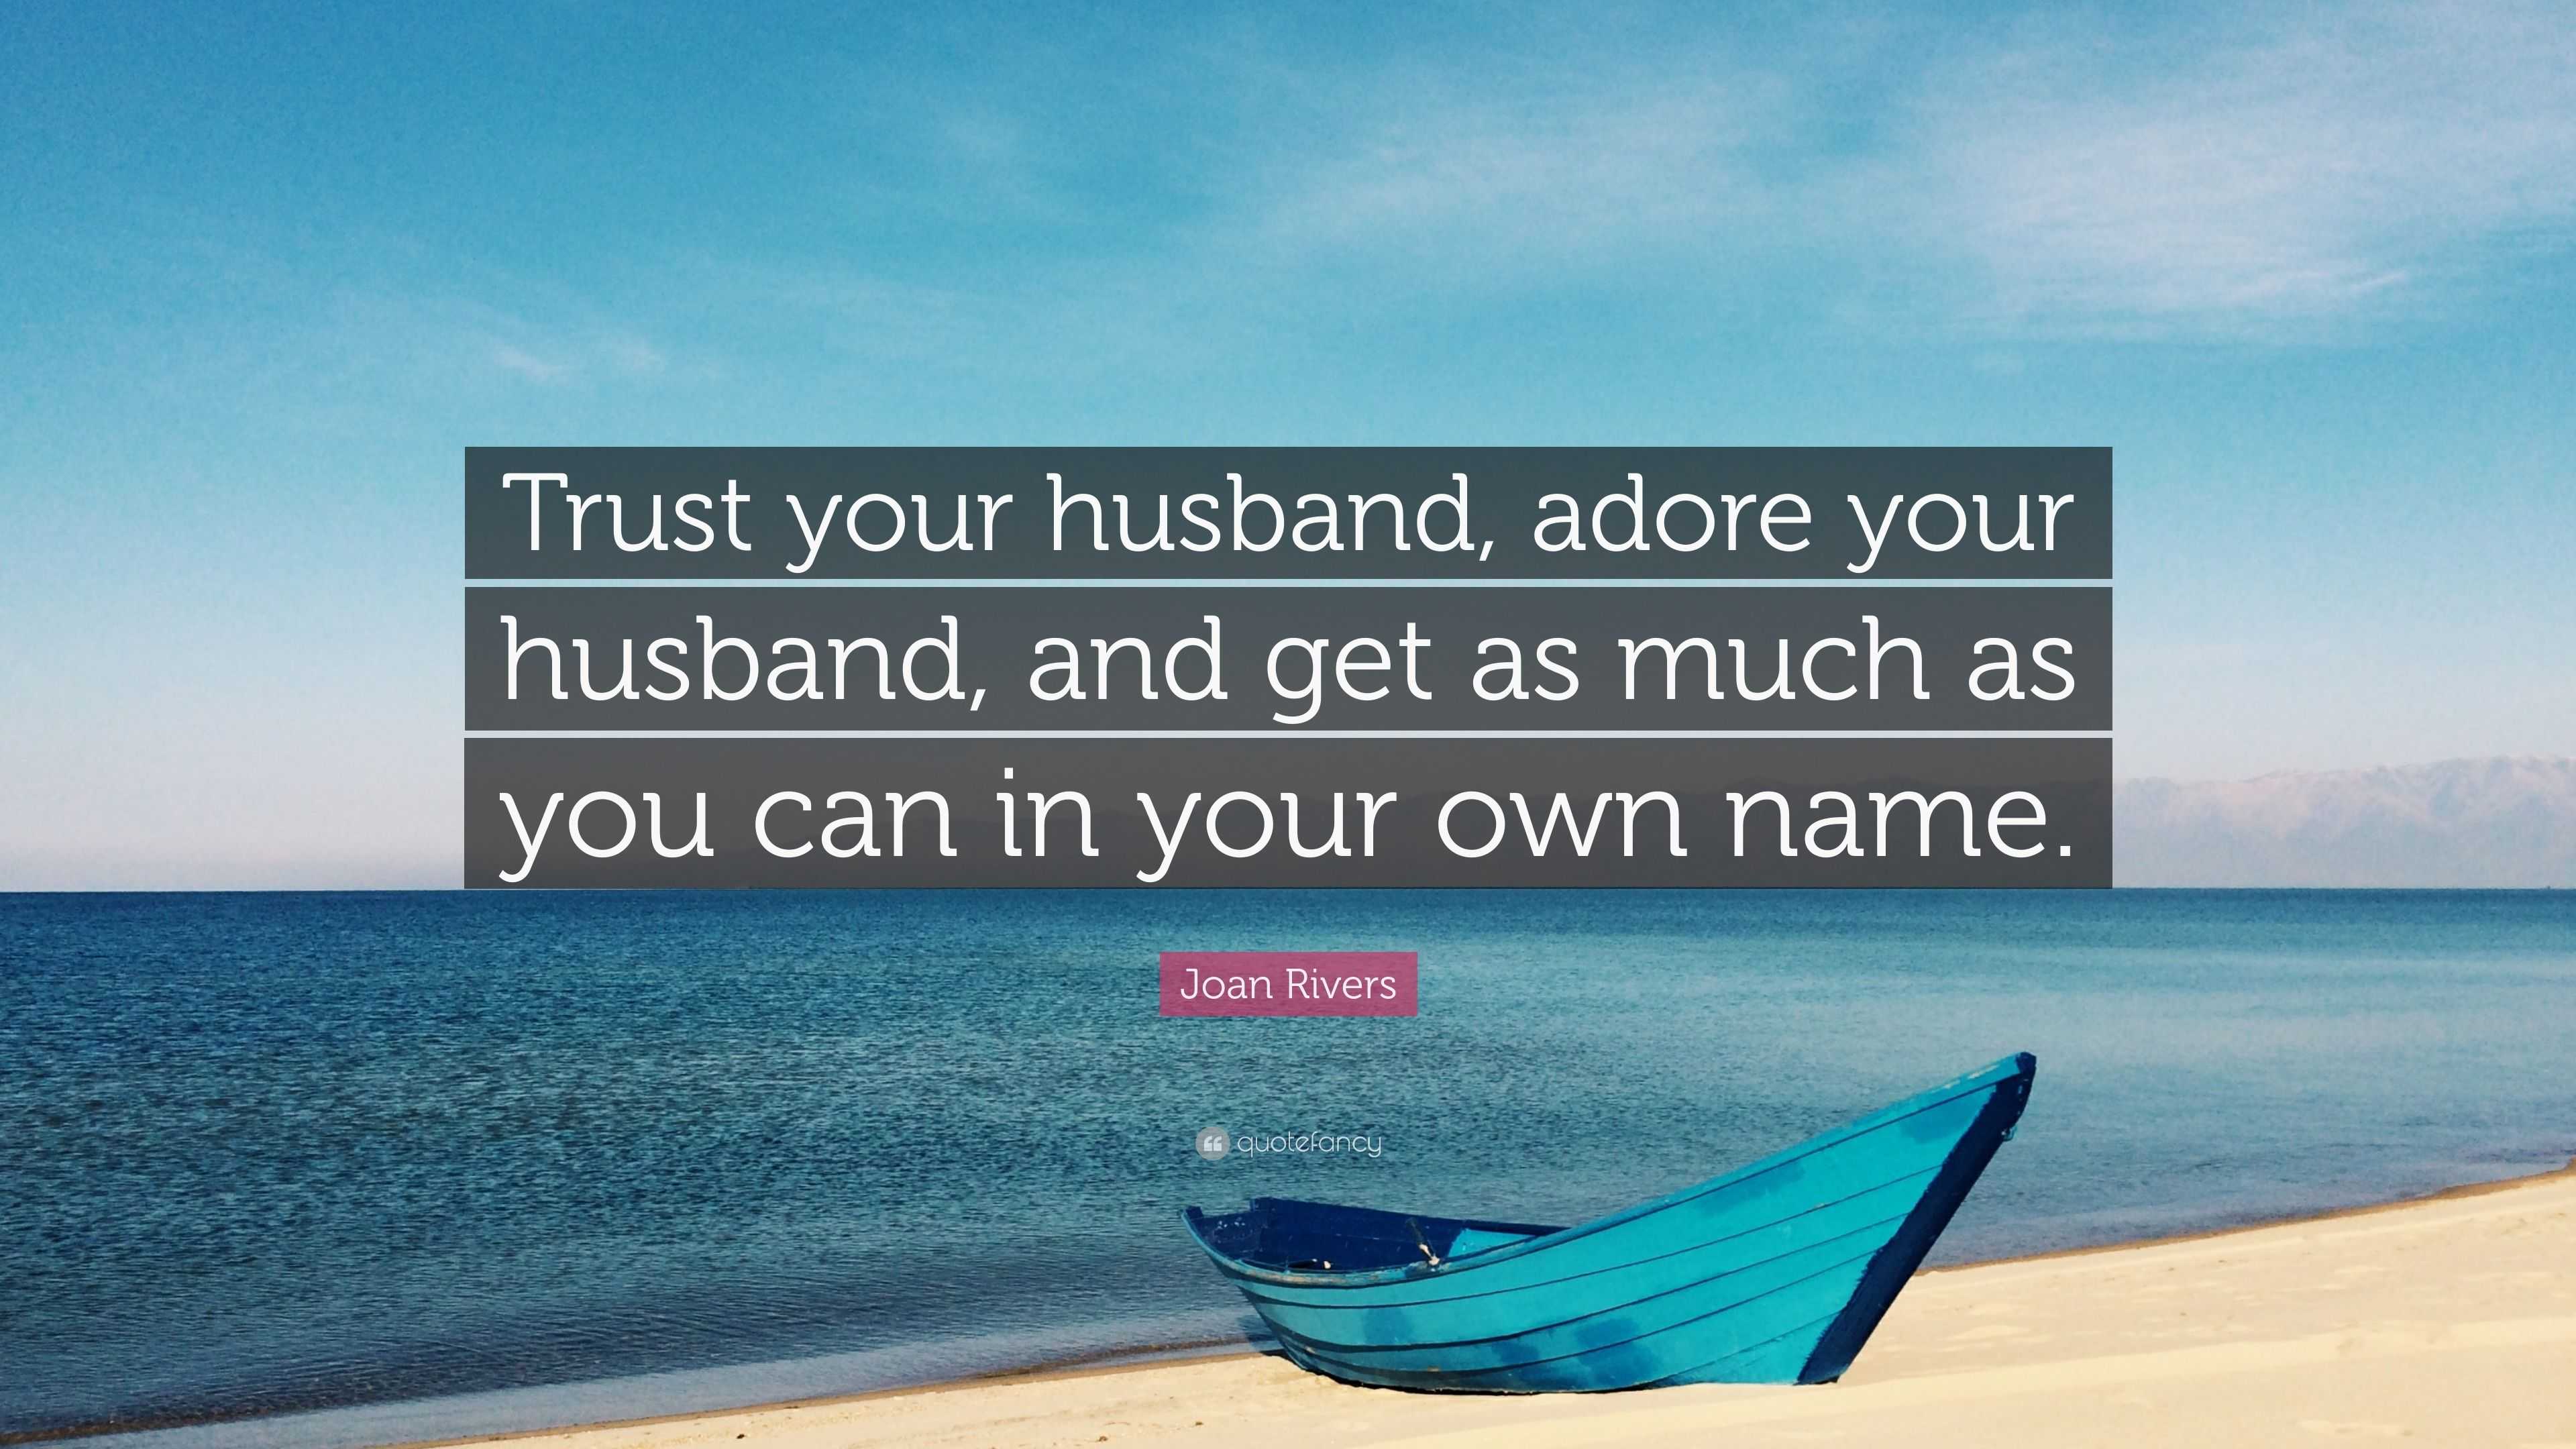 Joan Rivers Quote: “Trust your husband, adore your husband, and get as much  as you can